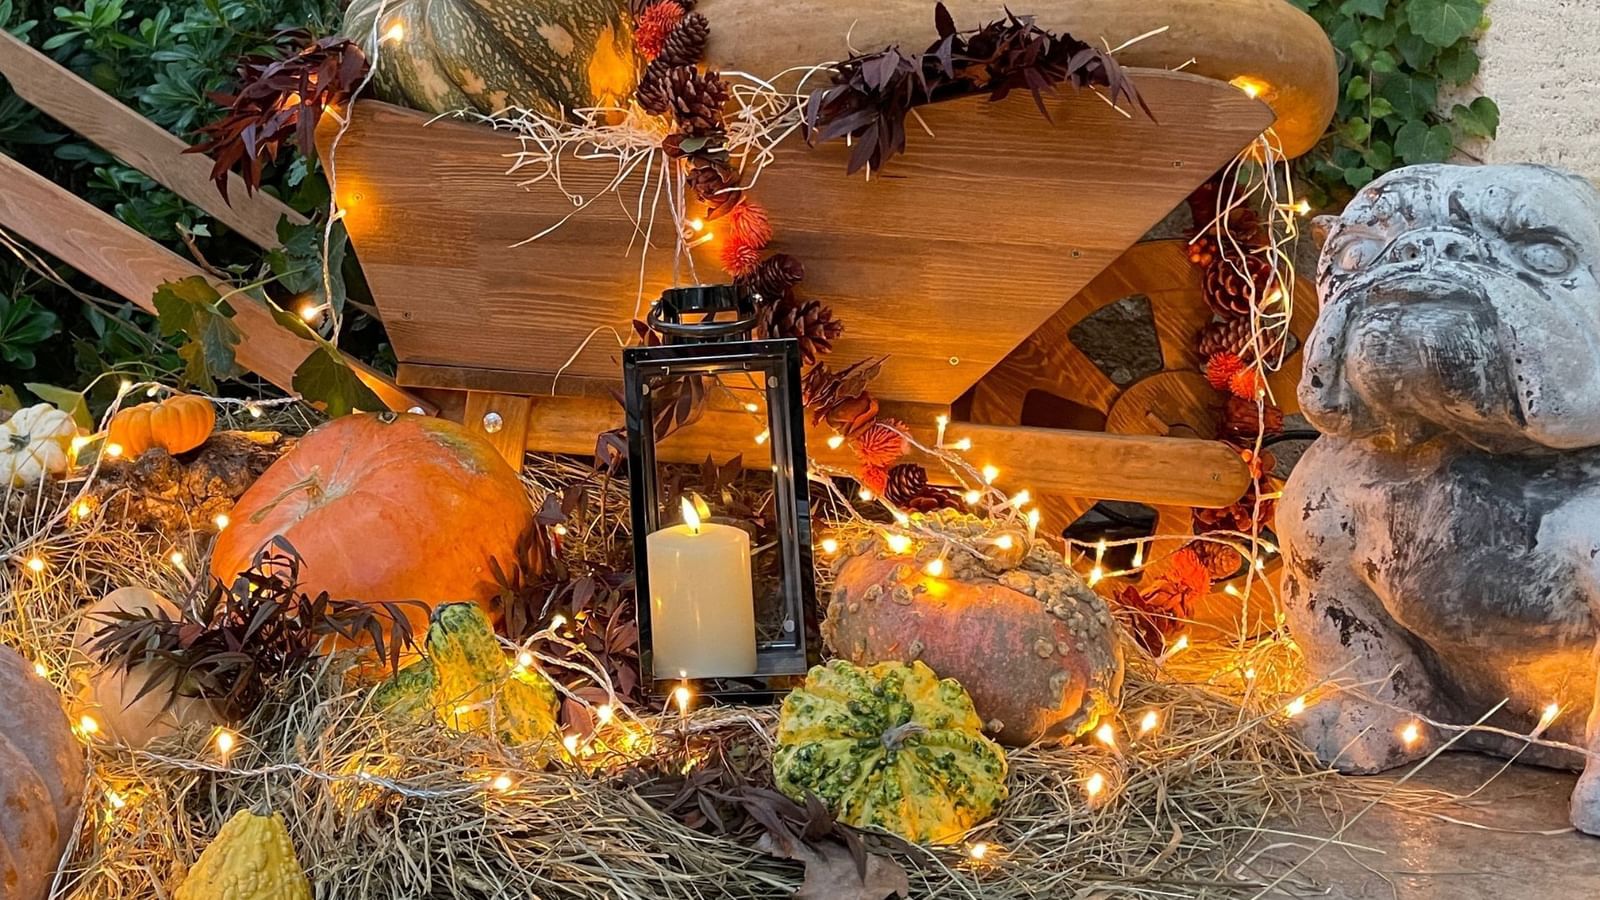 Pumpkins, hay & lights display for Fall at Domaine De Manville